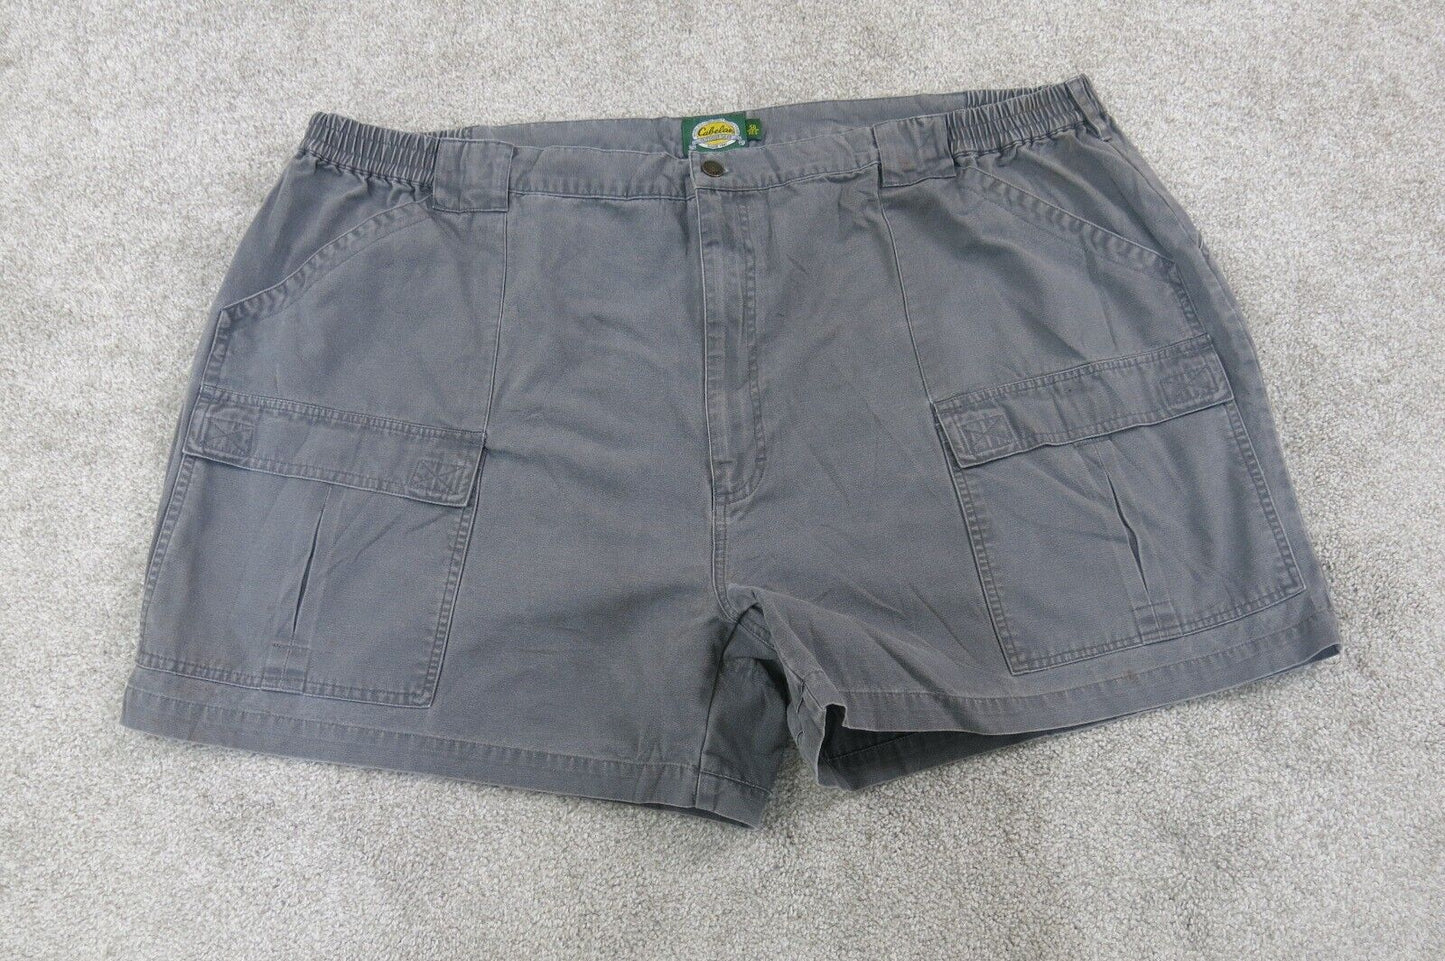 Cabelas Shorts Womens 50 Gray Chino Pockets Casual 100% Cotton Outdoor Work Wear